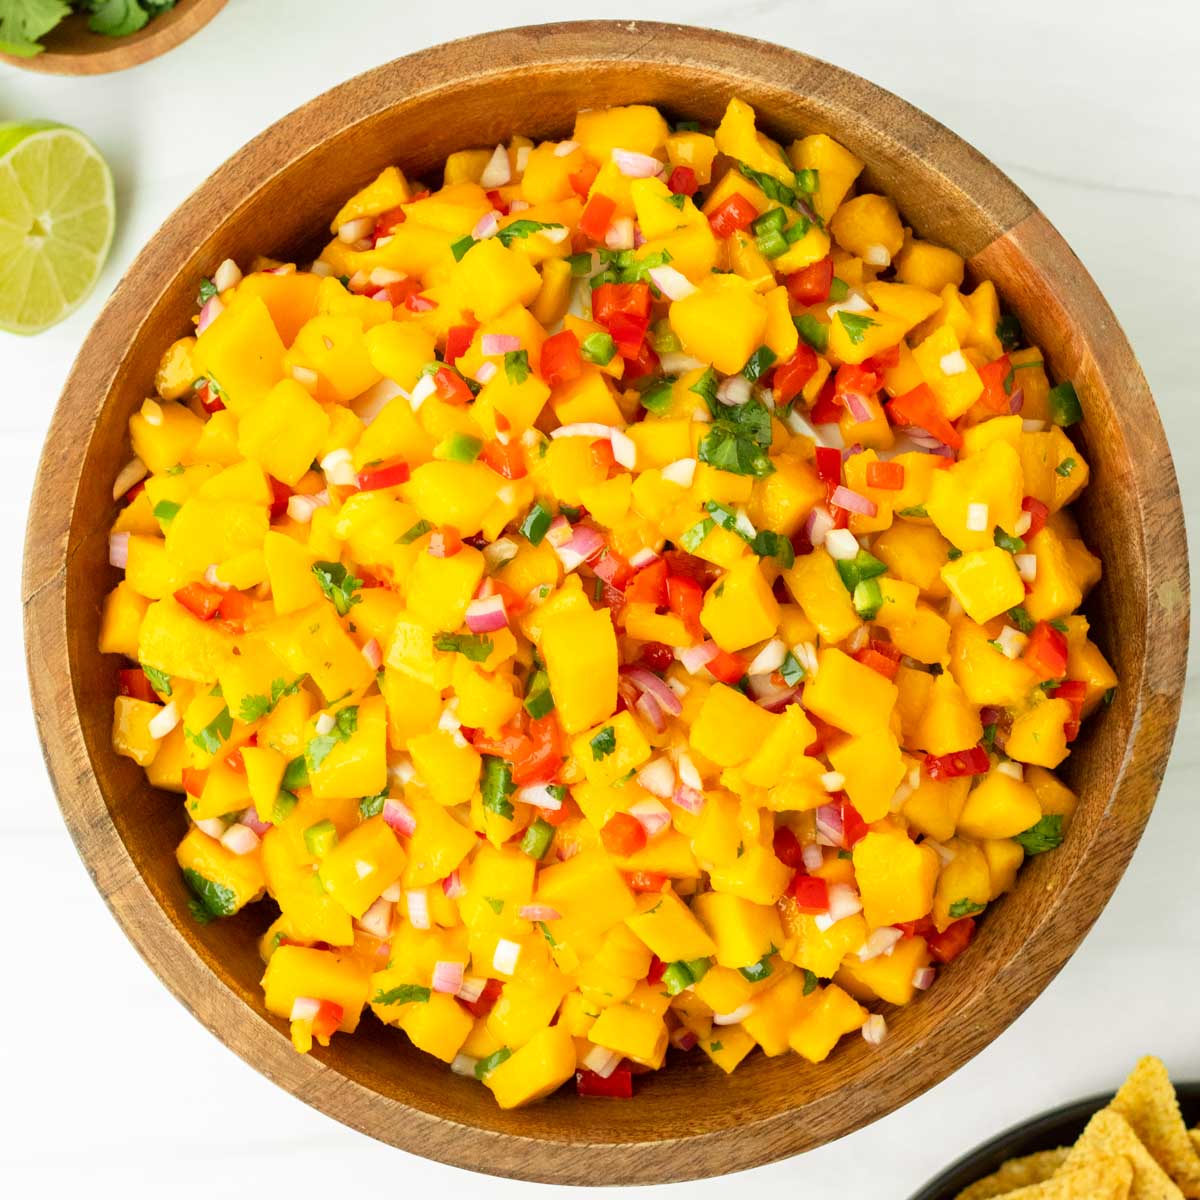 This mango salsa is an easy 6-ingredient salsa recipe perfect for a summer cookout or as a Fourth of July appetizer. Made with simple, flavorful ingredients, this homemade salsa is an easy and delicious summer dish.